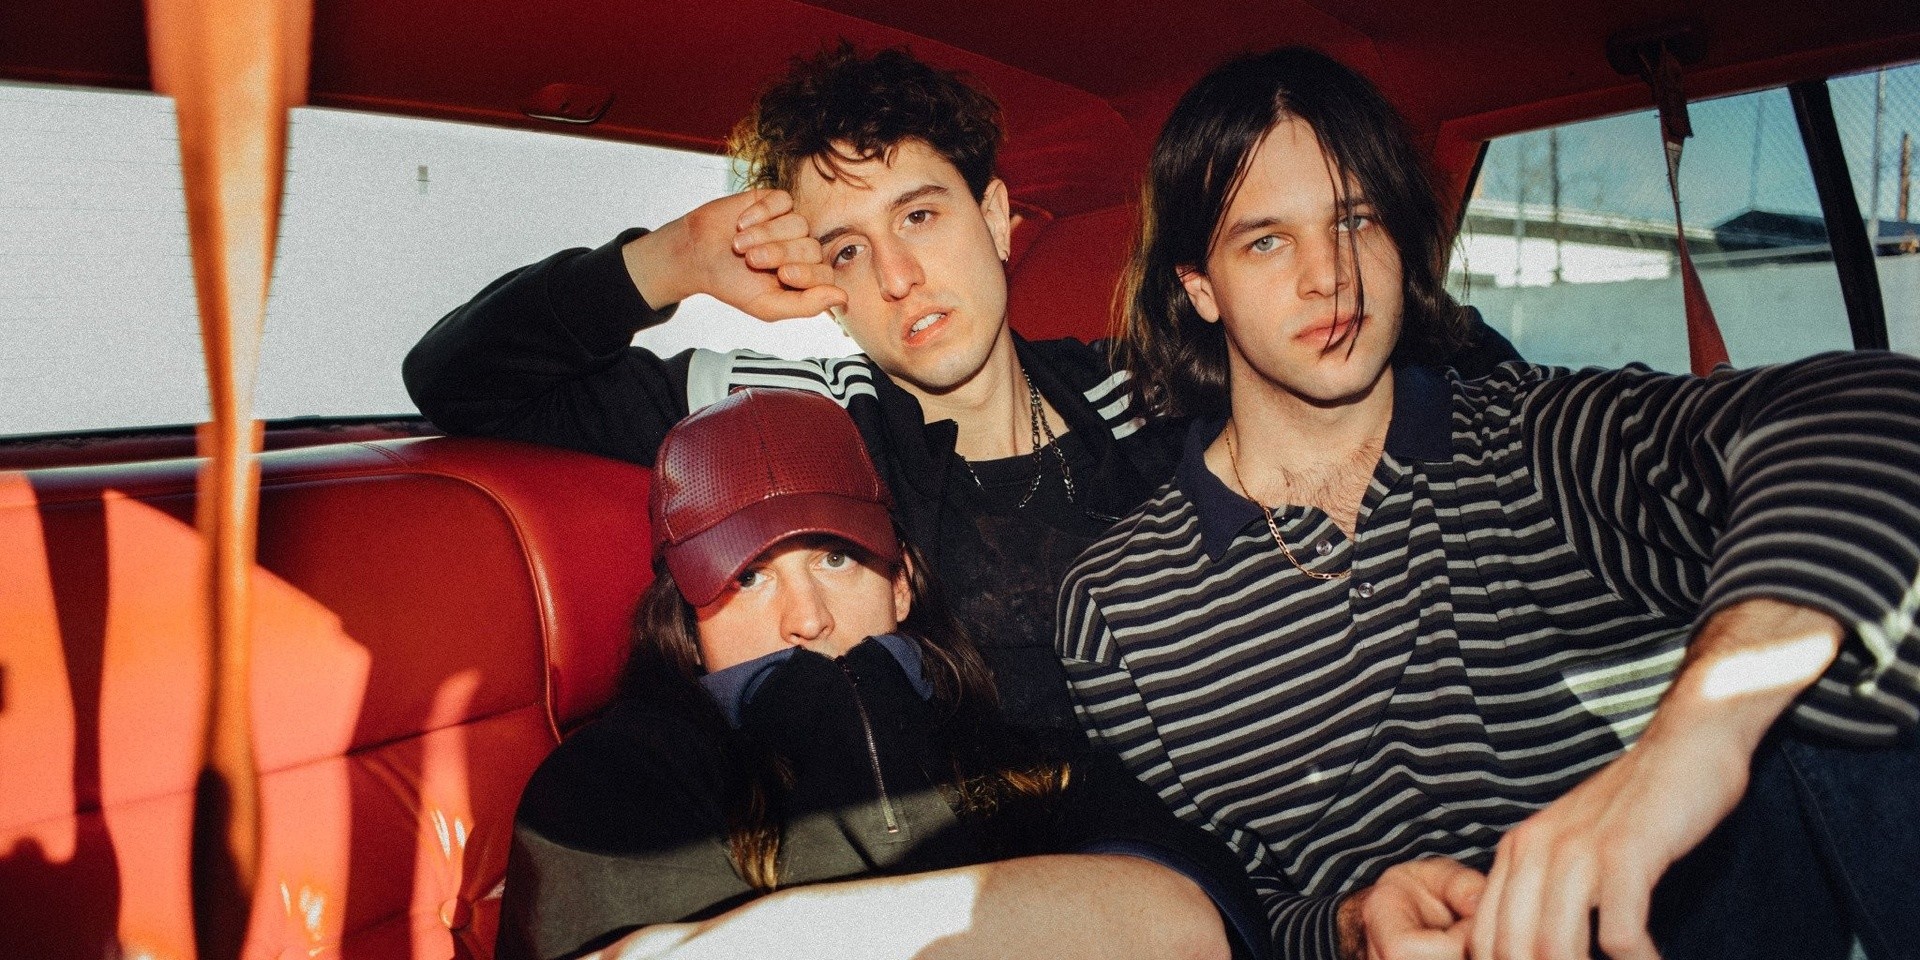 Beach Fossils is returning to Singapore